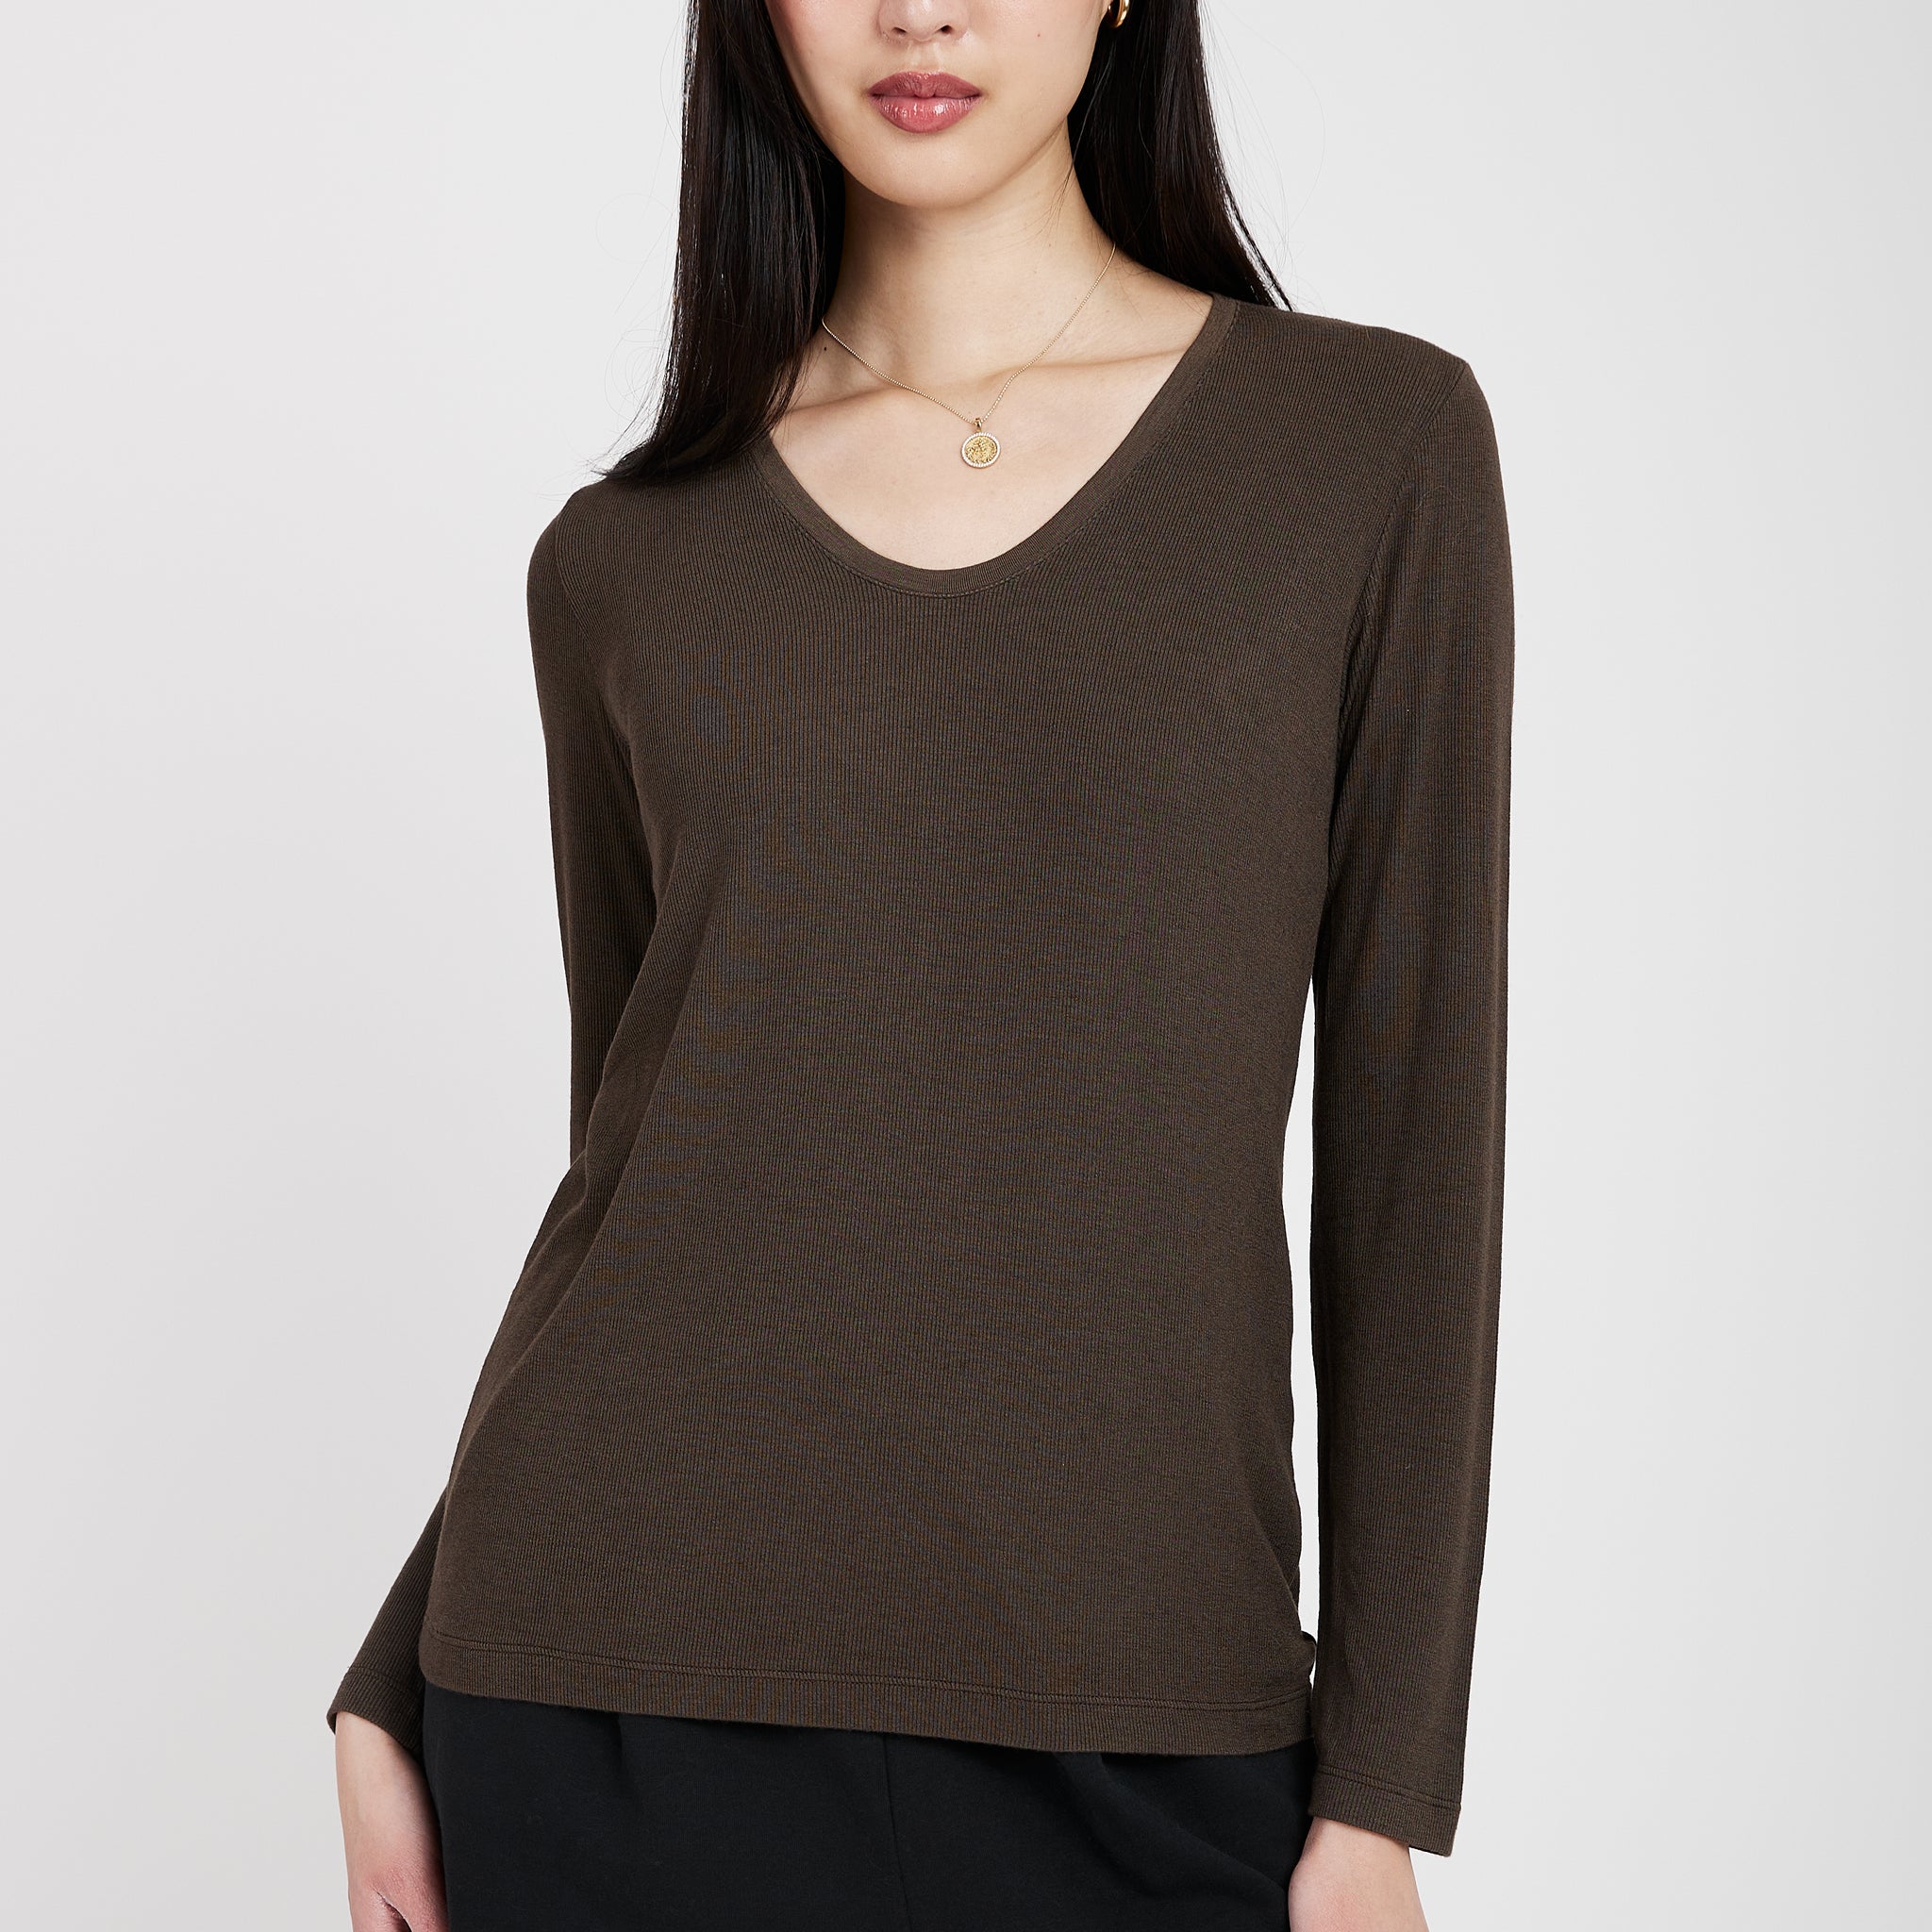 TRANSIT Long Sleeve V-Neck Top in Chocolate